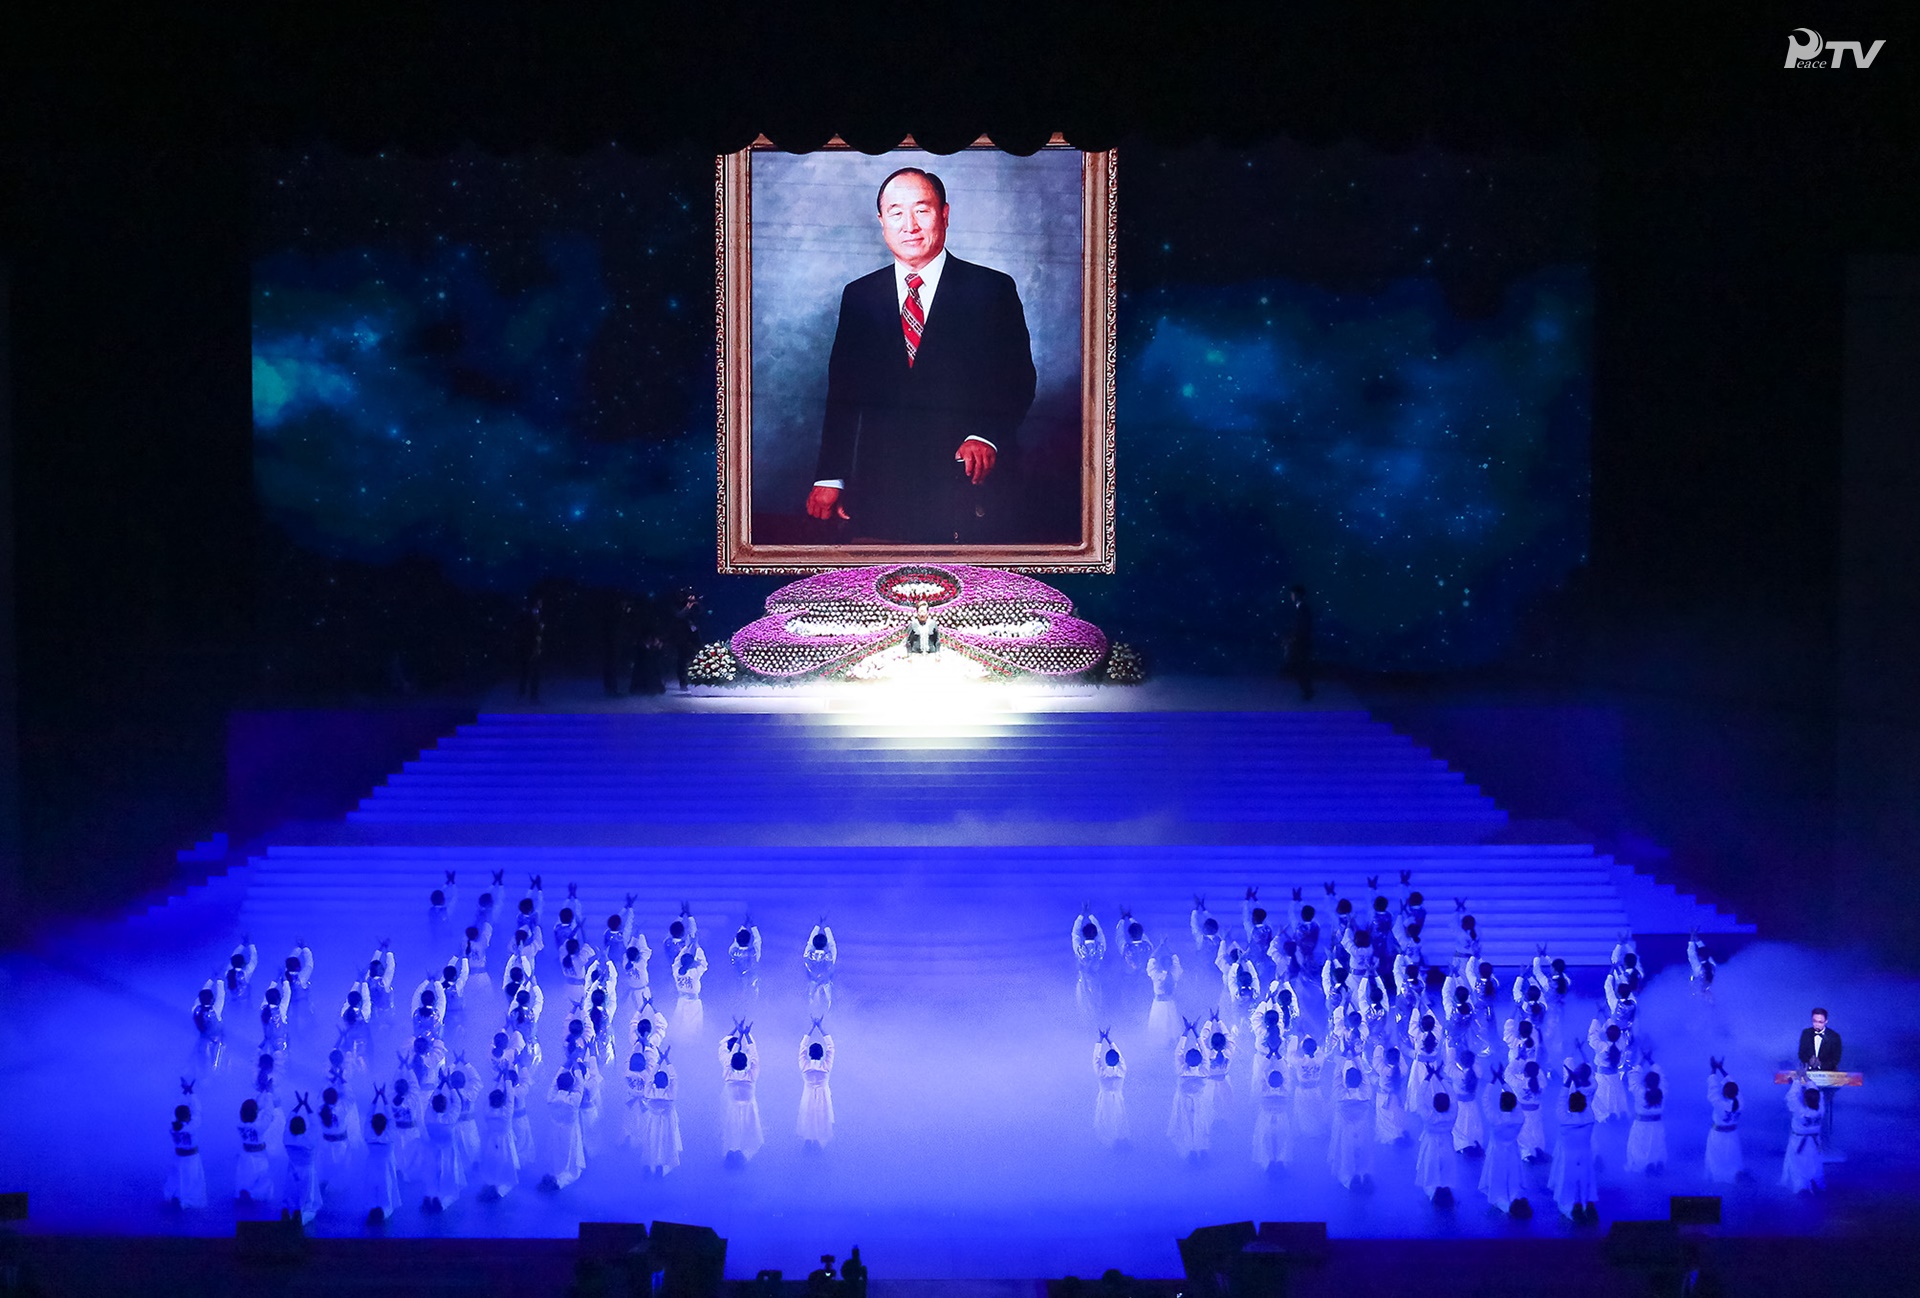 The Seonghwa Festival Commemorating the 7th Anniversary of the Ascension of Sun Myung Moon, the True Parent of Heaven, Earth and Humankind. (17 August, 2019)